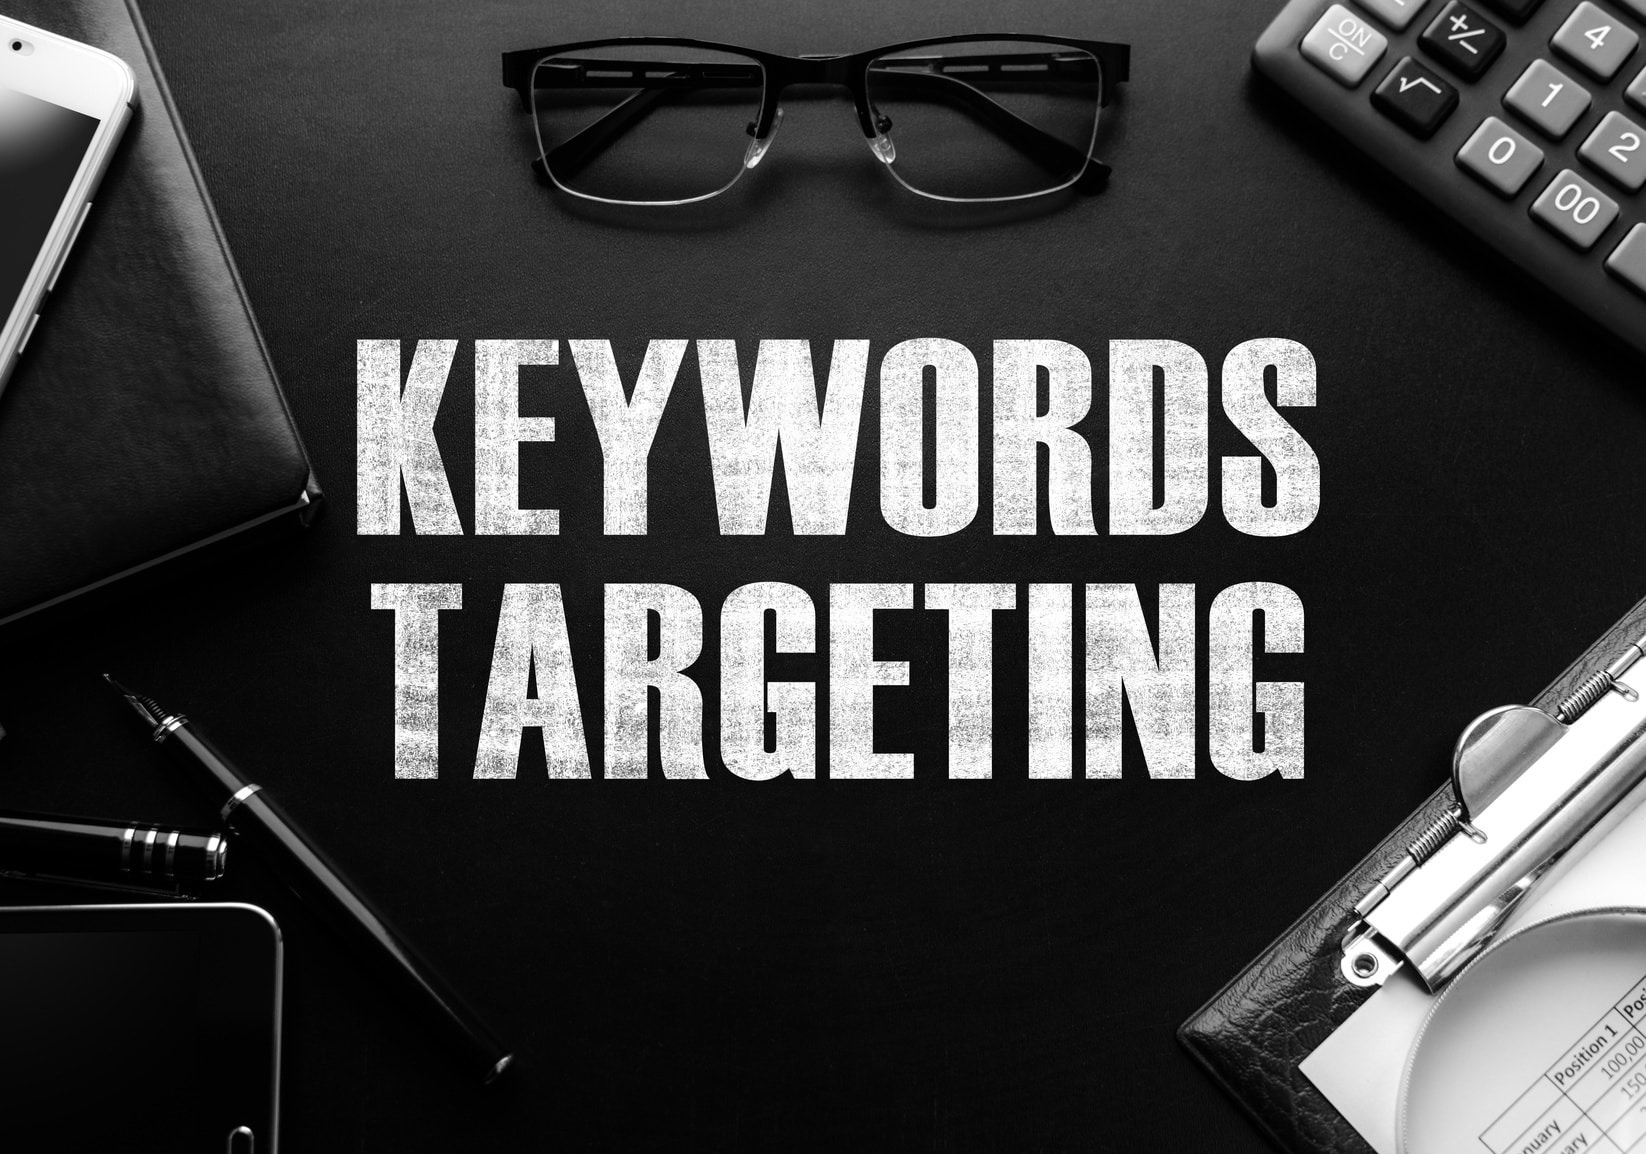 How to Research the Right Business Keywords